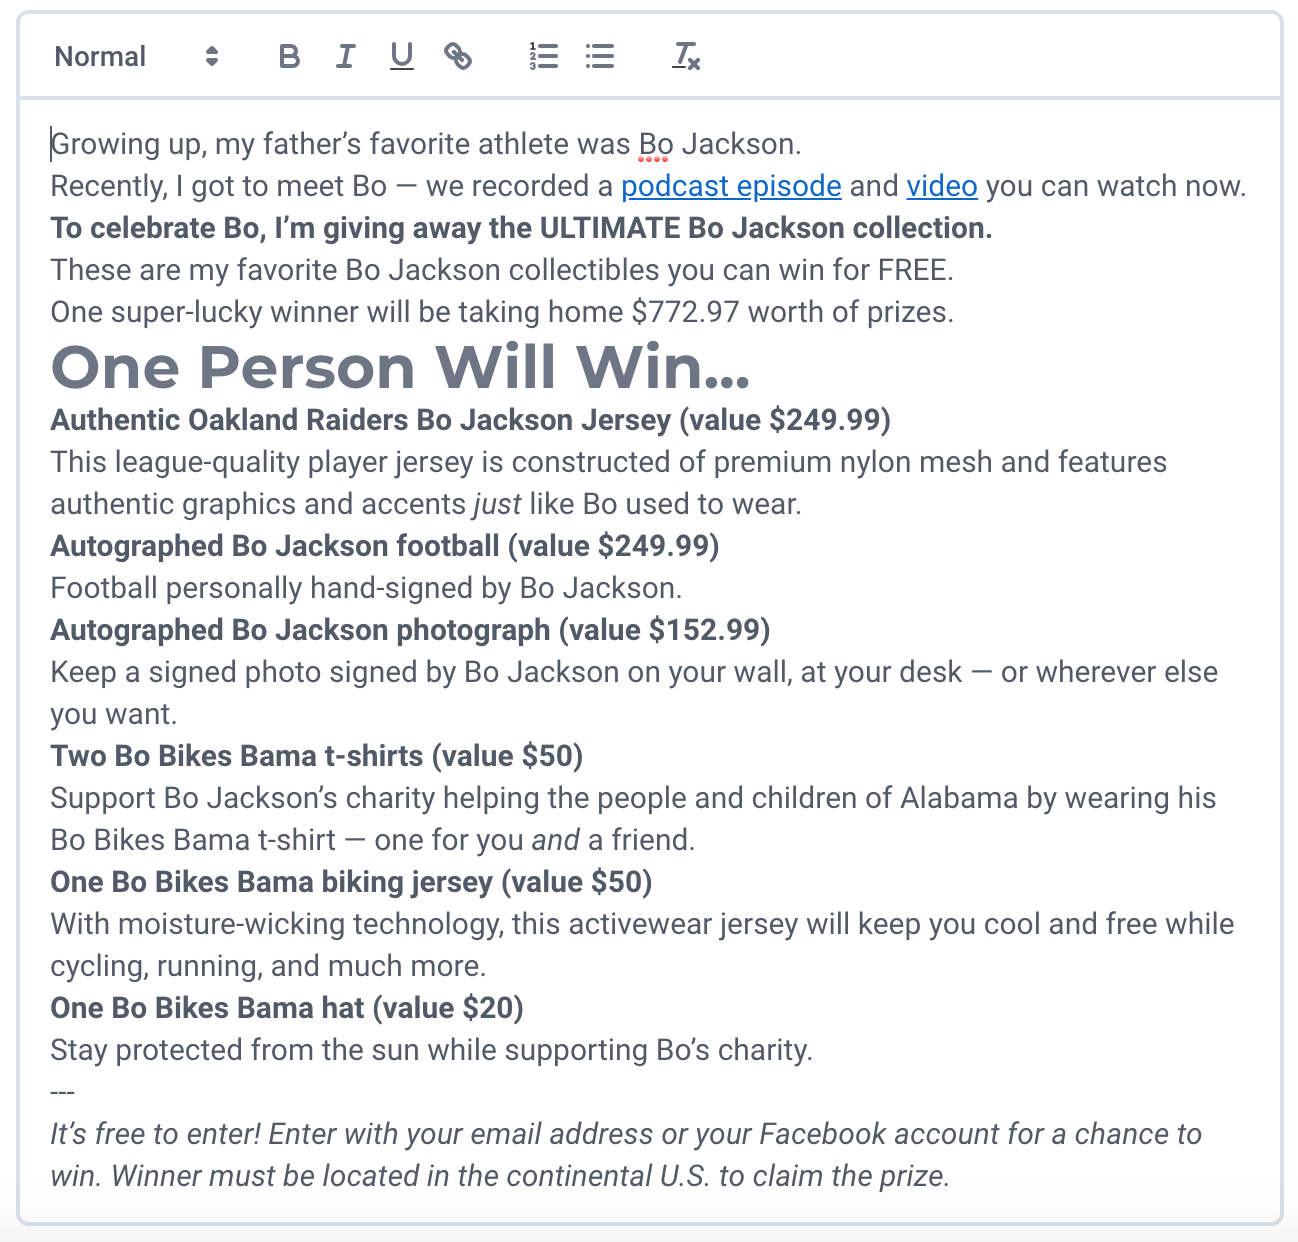 Screenshot showing copy about a sweepstakes